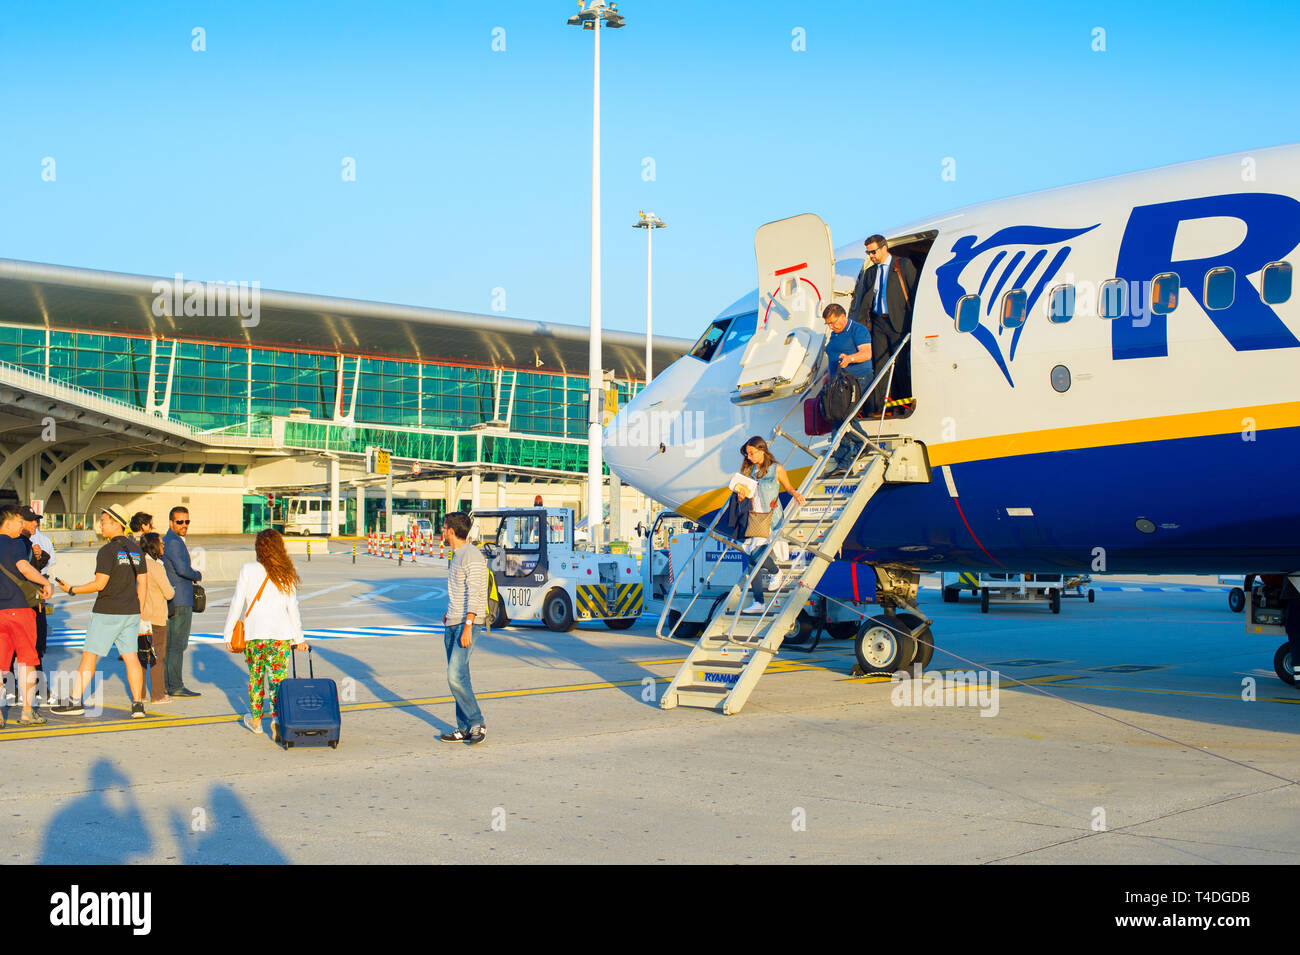 PORTO, PORTUGAL - MAY 24, 2017: Passengers leaving airplane by ladder, glass facade of airport in background Stock Photo